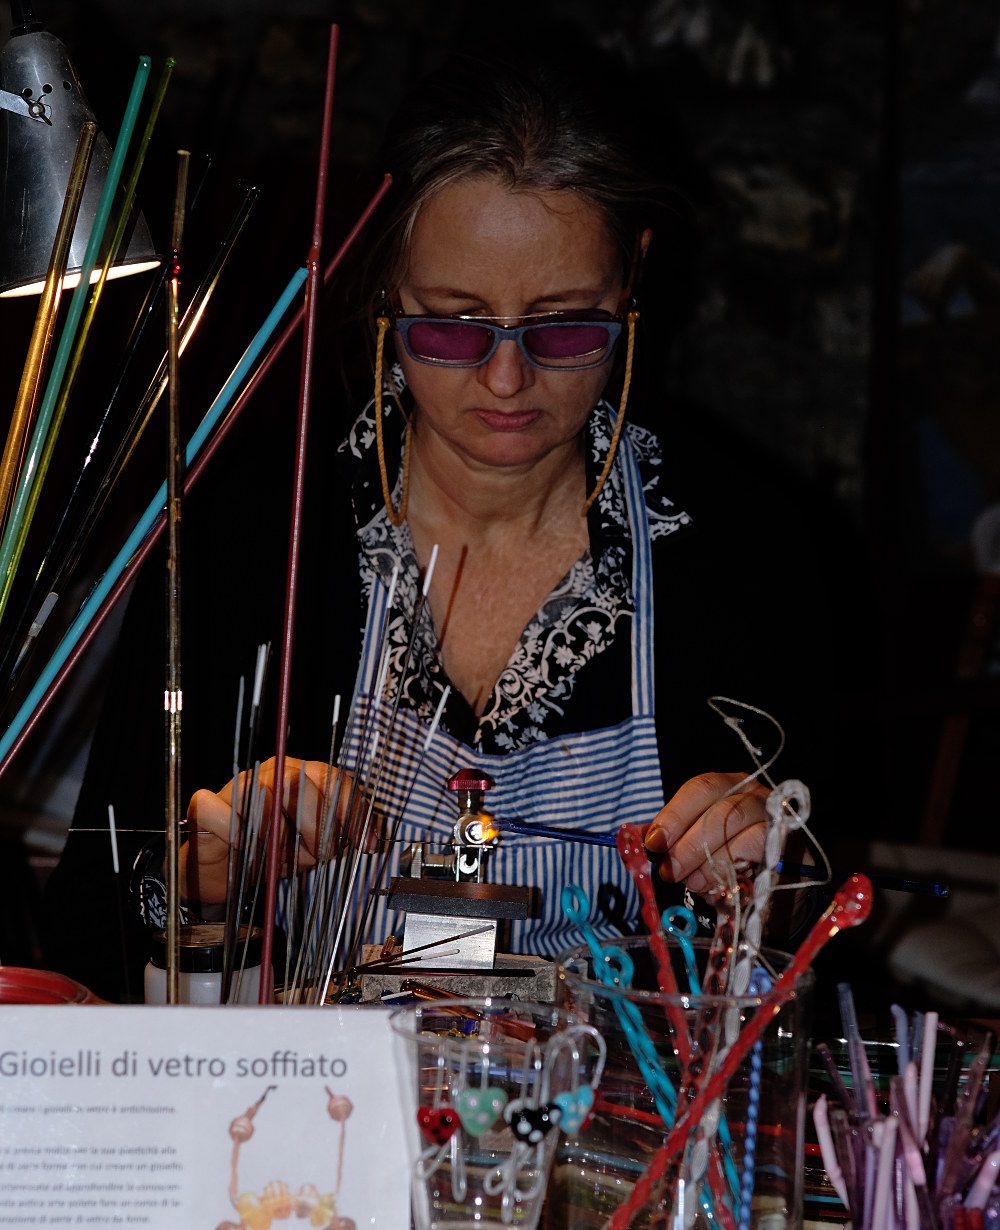 artisan working on glass jewels, photographed in low-light